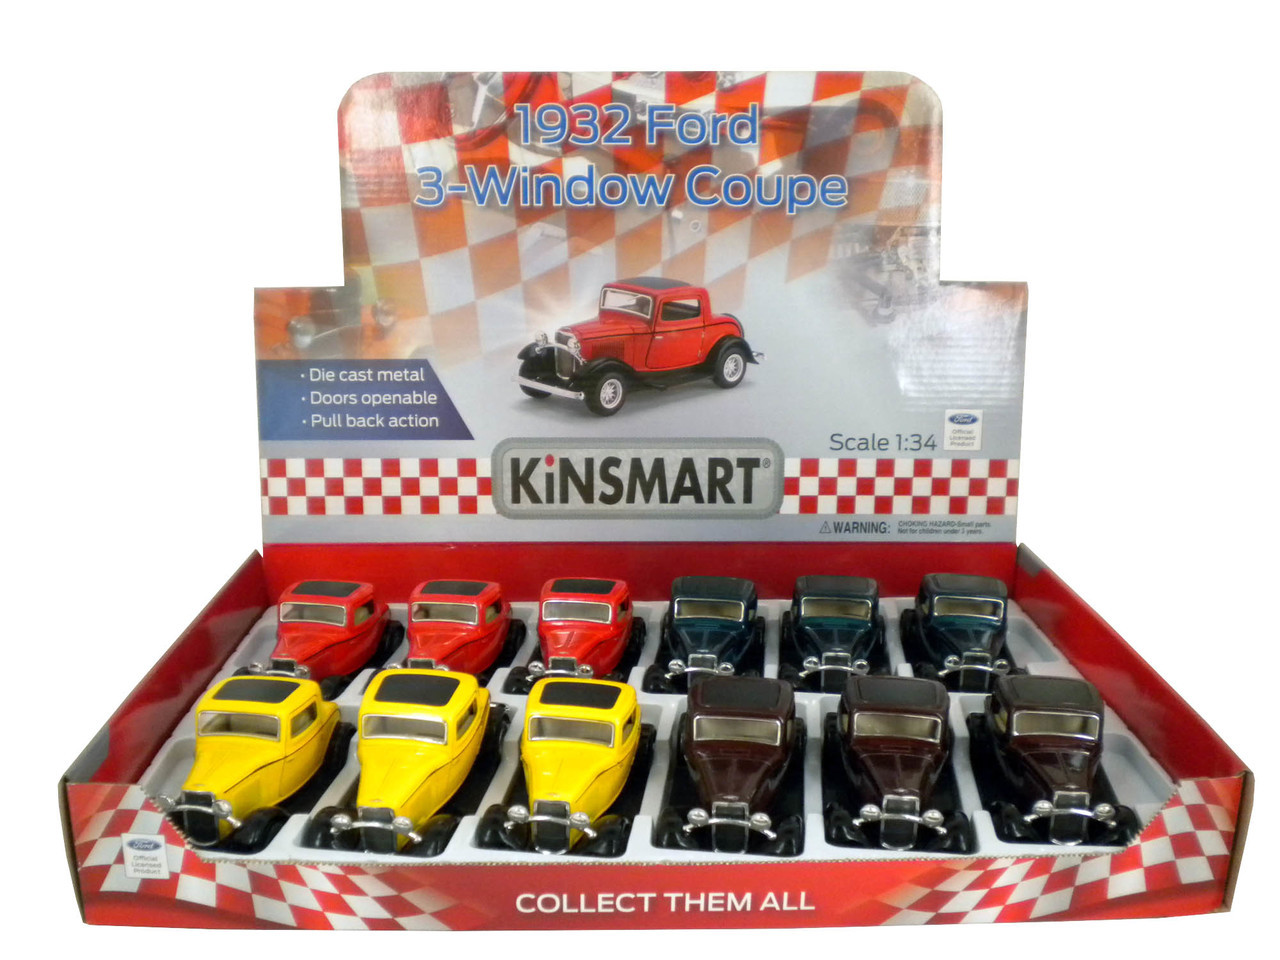 Multicolor KT5332D KiNSMART Set of 4: 5 1932 Ford 3-Window Coupe 1:34 Scale Green/Maroon/Red/Yellow Toy 